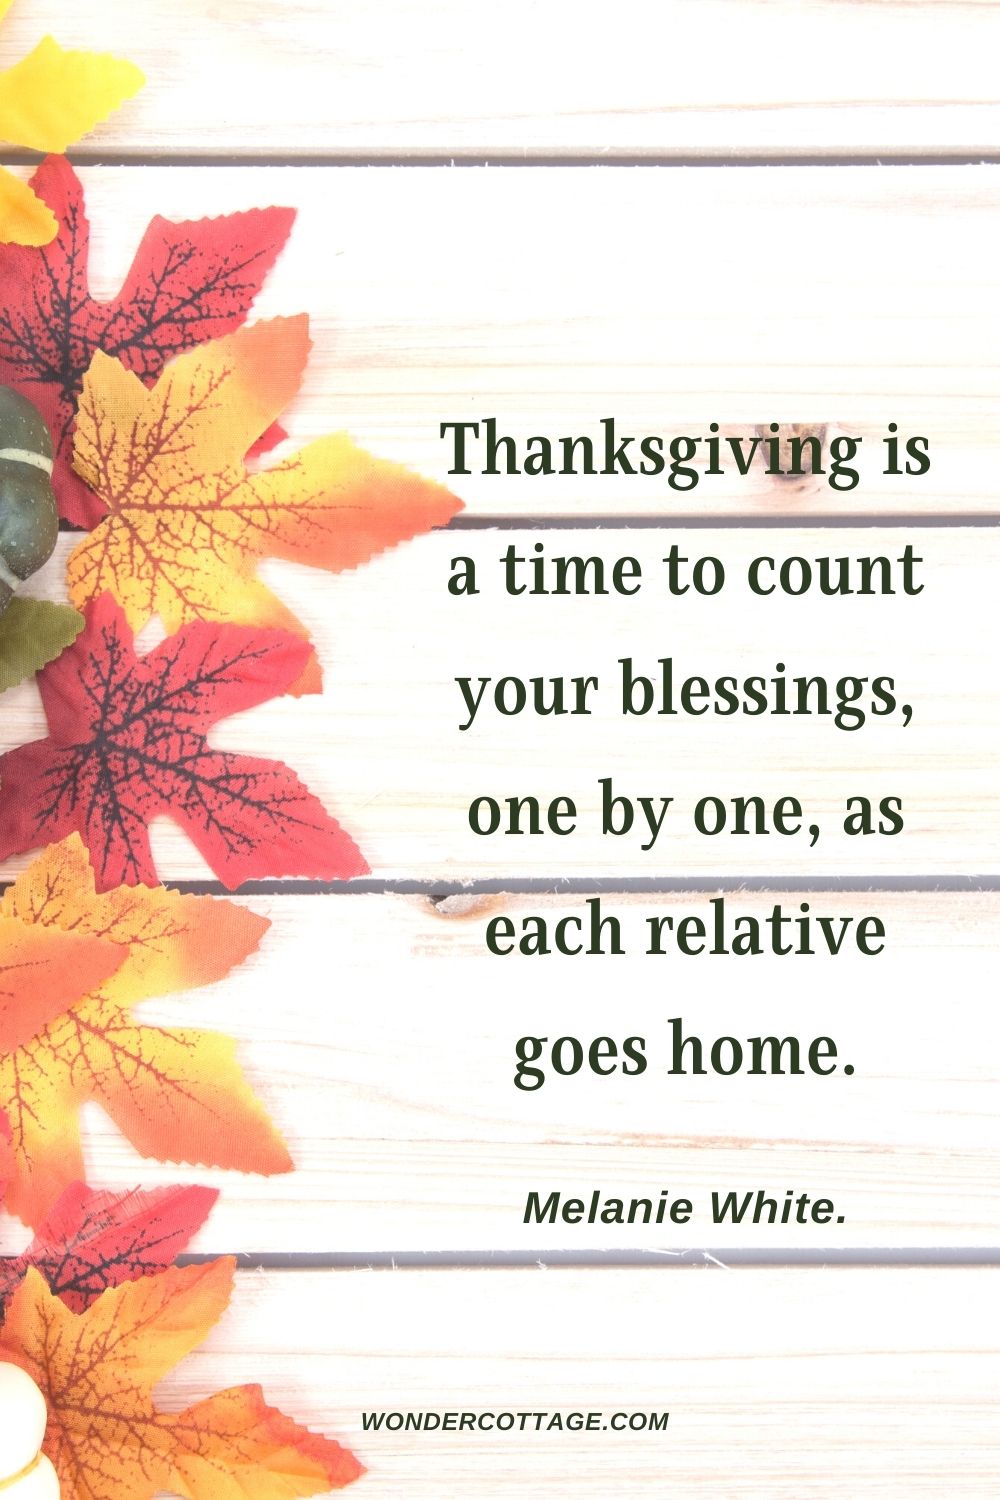 Thanksgiving is a time to count your blessings, one by one, as each relative goes home. Melanie White.